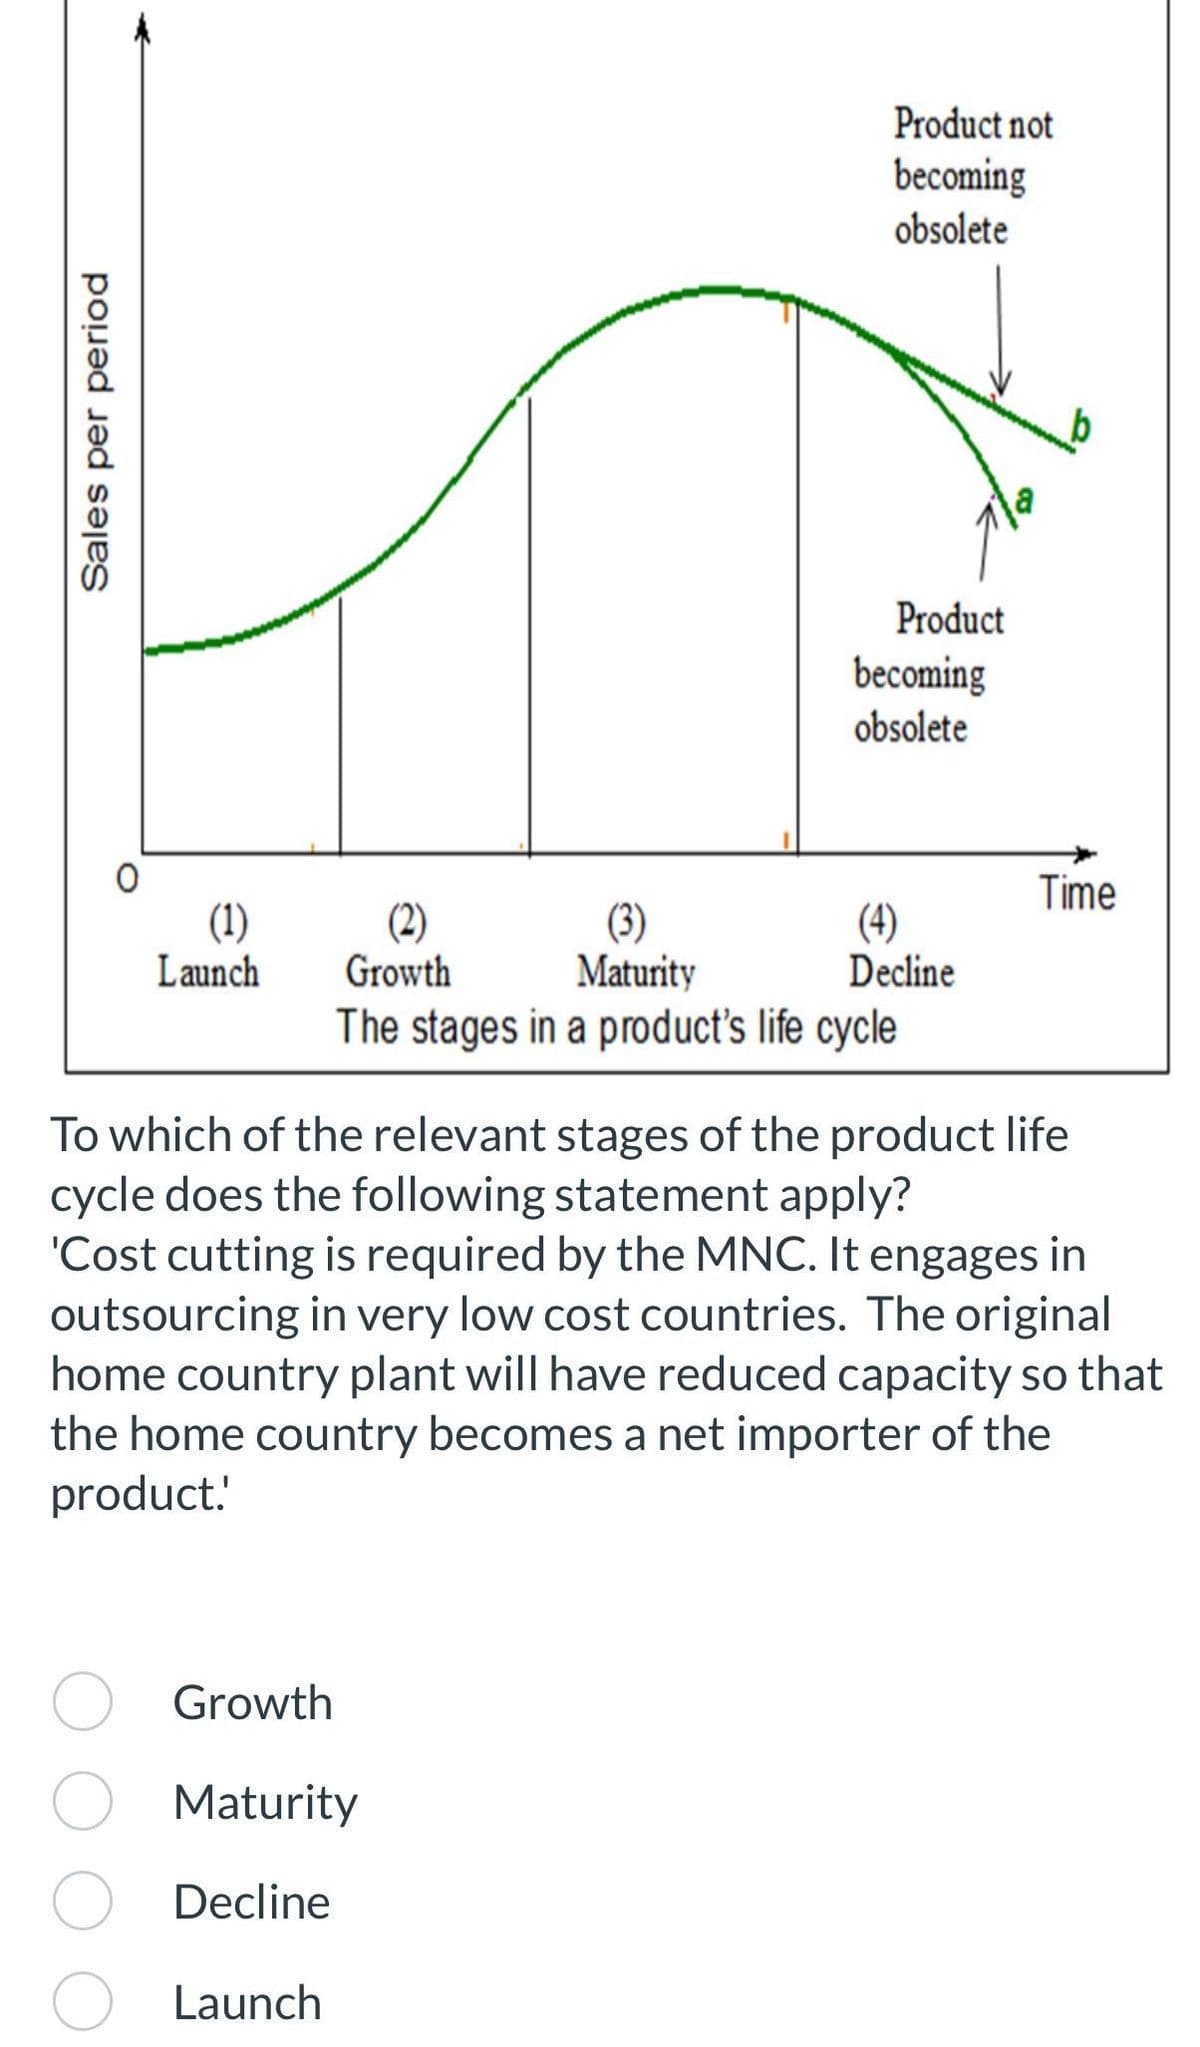 Sales per period
(1)
Launch
Product not
becoming
obsolete
Product
Growth
Maturity
Decline
Launch
becoming
obsolete
(2)
(3)
Growth
Maturity
The stages in a product's life cycle
(4)
Decline
Time
To which of the relevant stages of the product life
cycle does the following statement apply?
'Cost cutting is required by the MNC. It engages in
outsourcing in very low cost countries. The original
home country plant will have reduced capacity so that
the home country becomes a net importer of the
product.